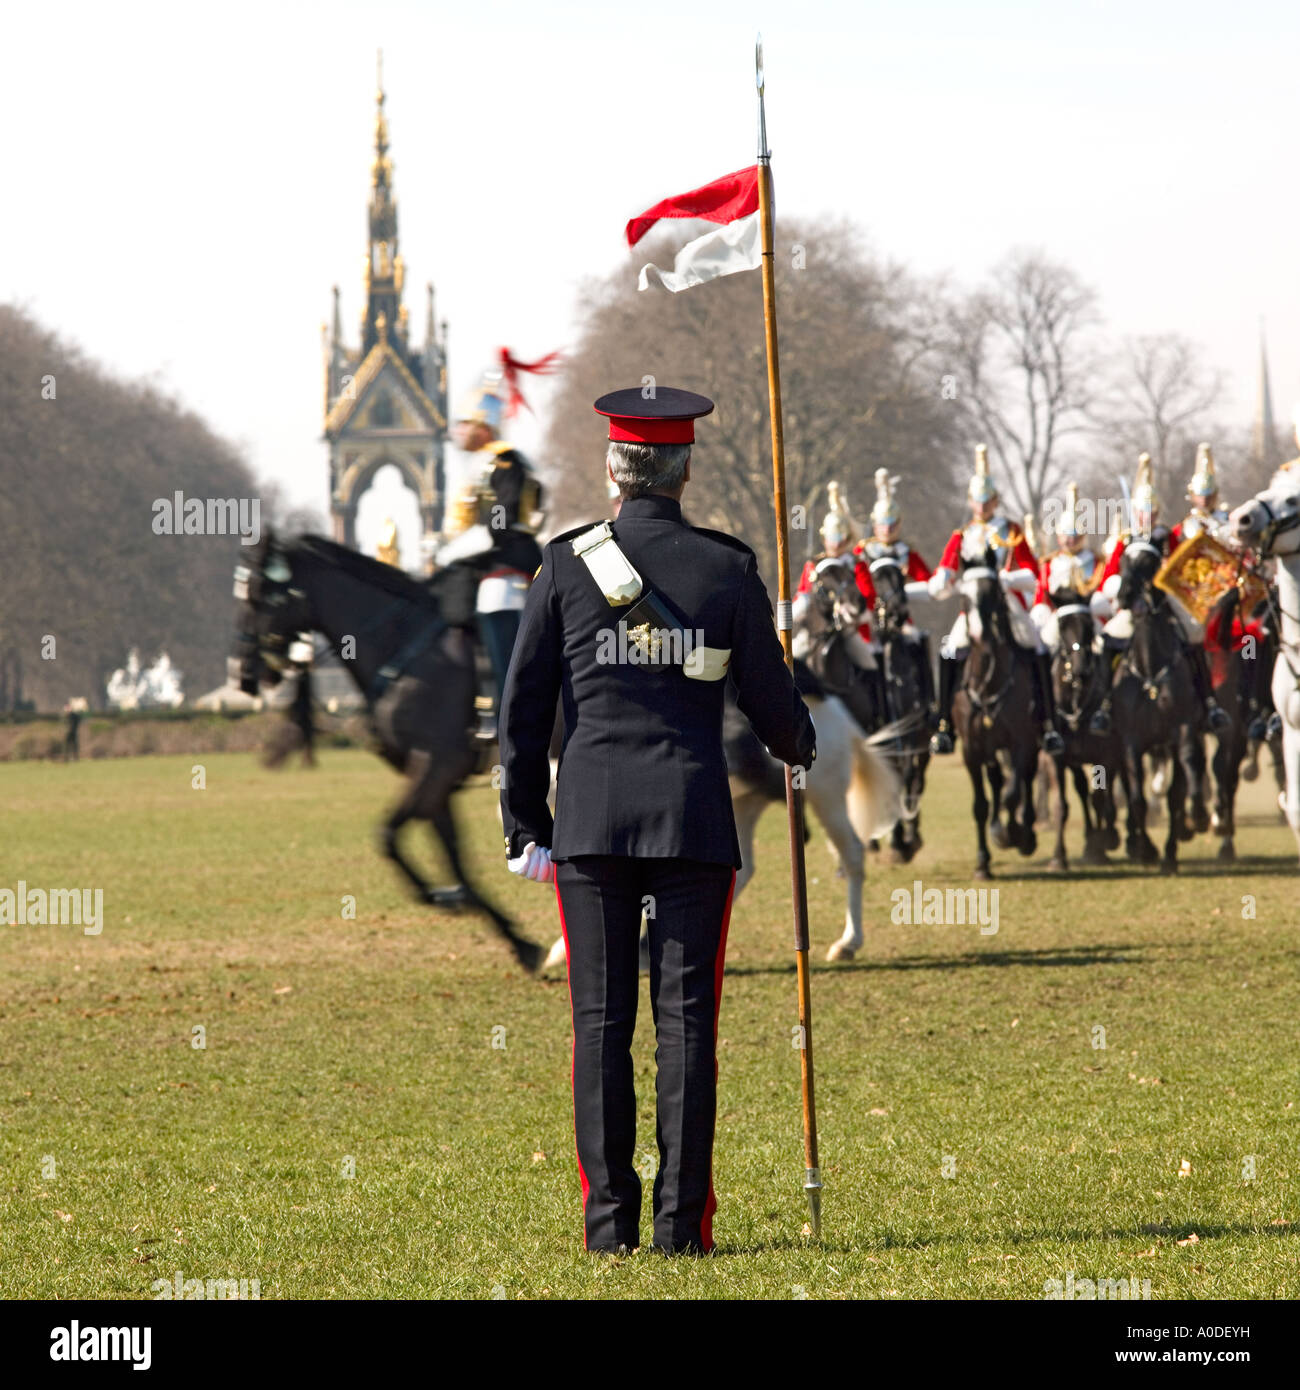 Household Cavalry training No model release required: back view, blur,  and uniform makes all unrecognizable Stock Photo